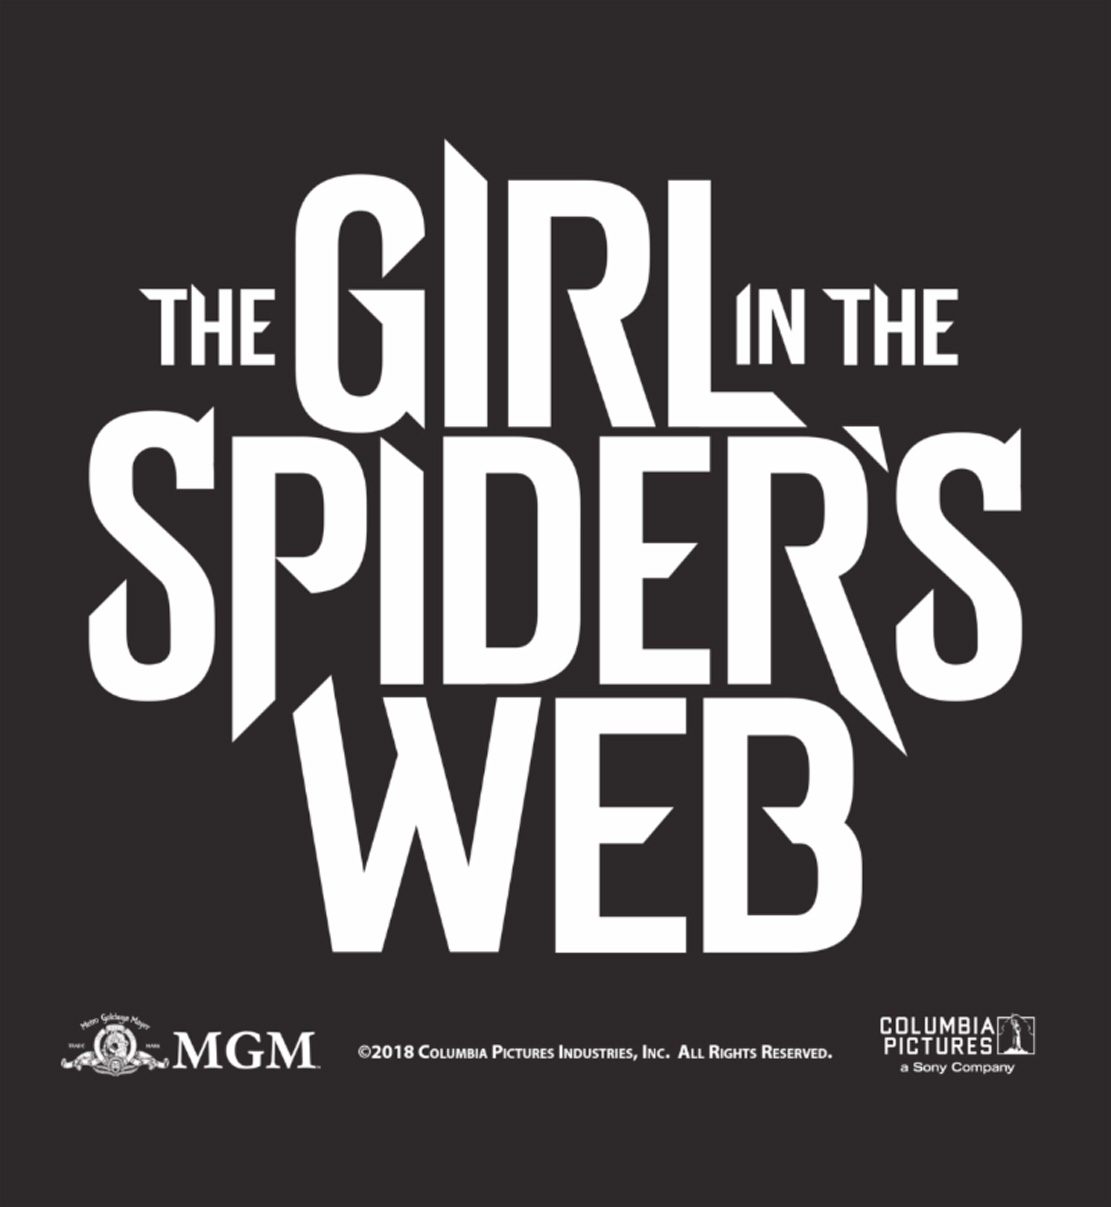 the-girl-in-the-spiders-web_logo